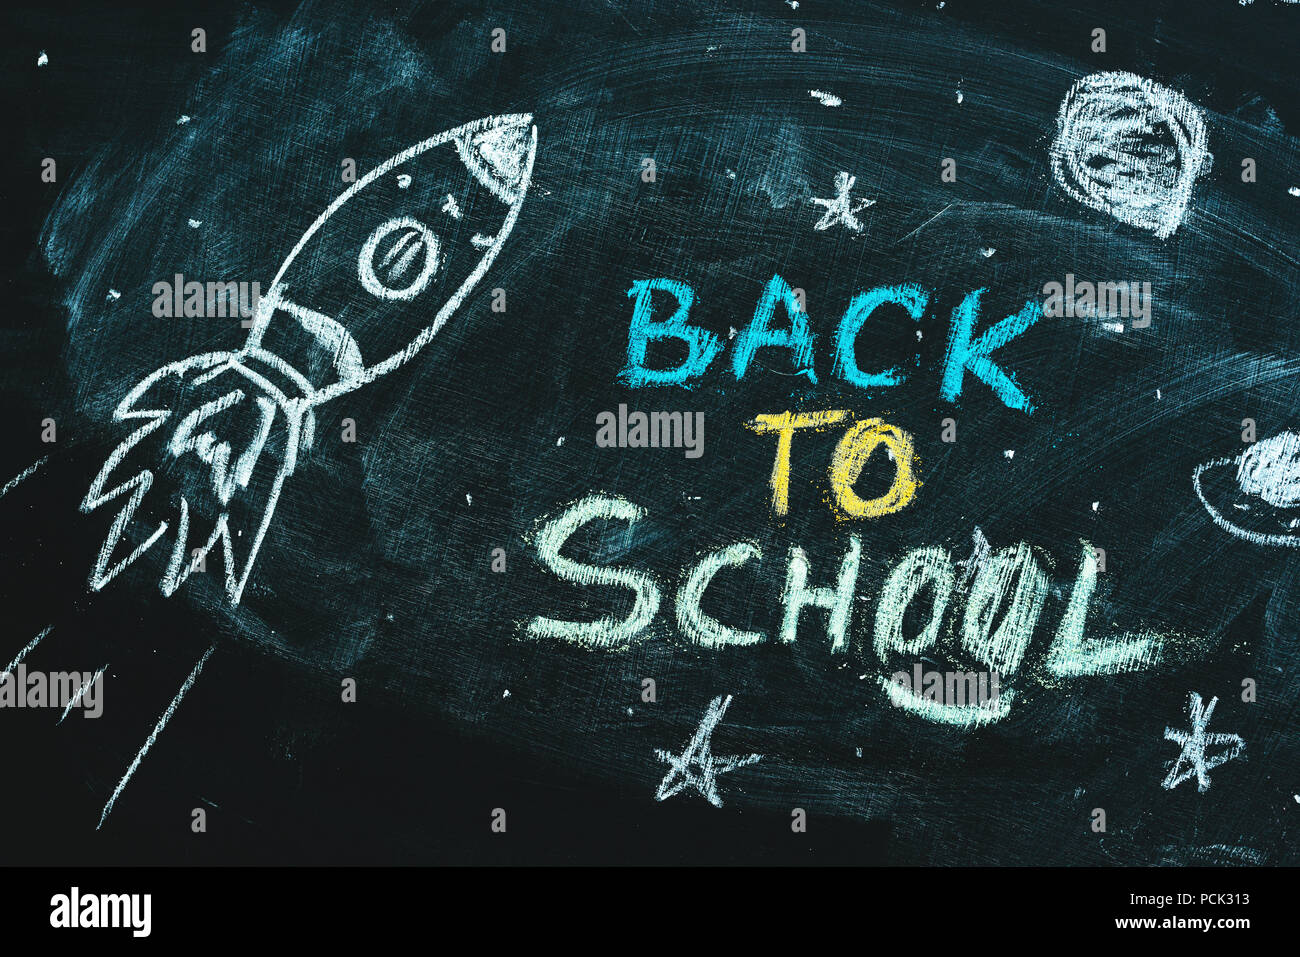 Space rocket with planets and stars doodle drawing on chalkboard, back to school concept Stock Photo